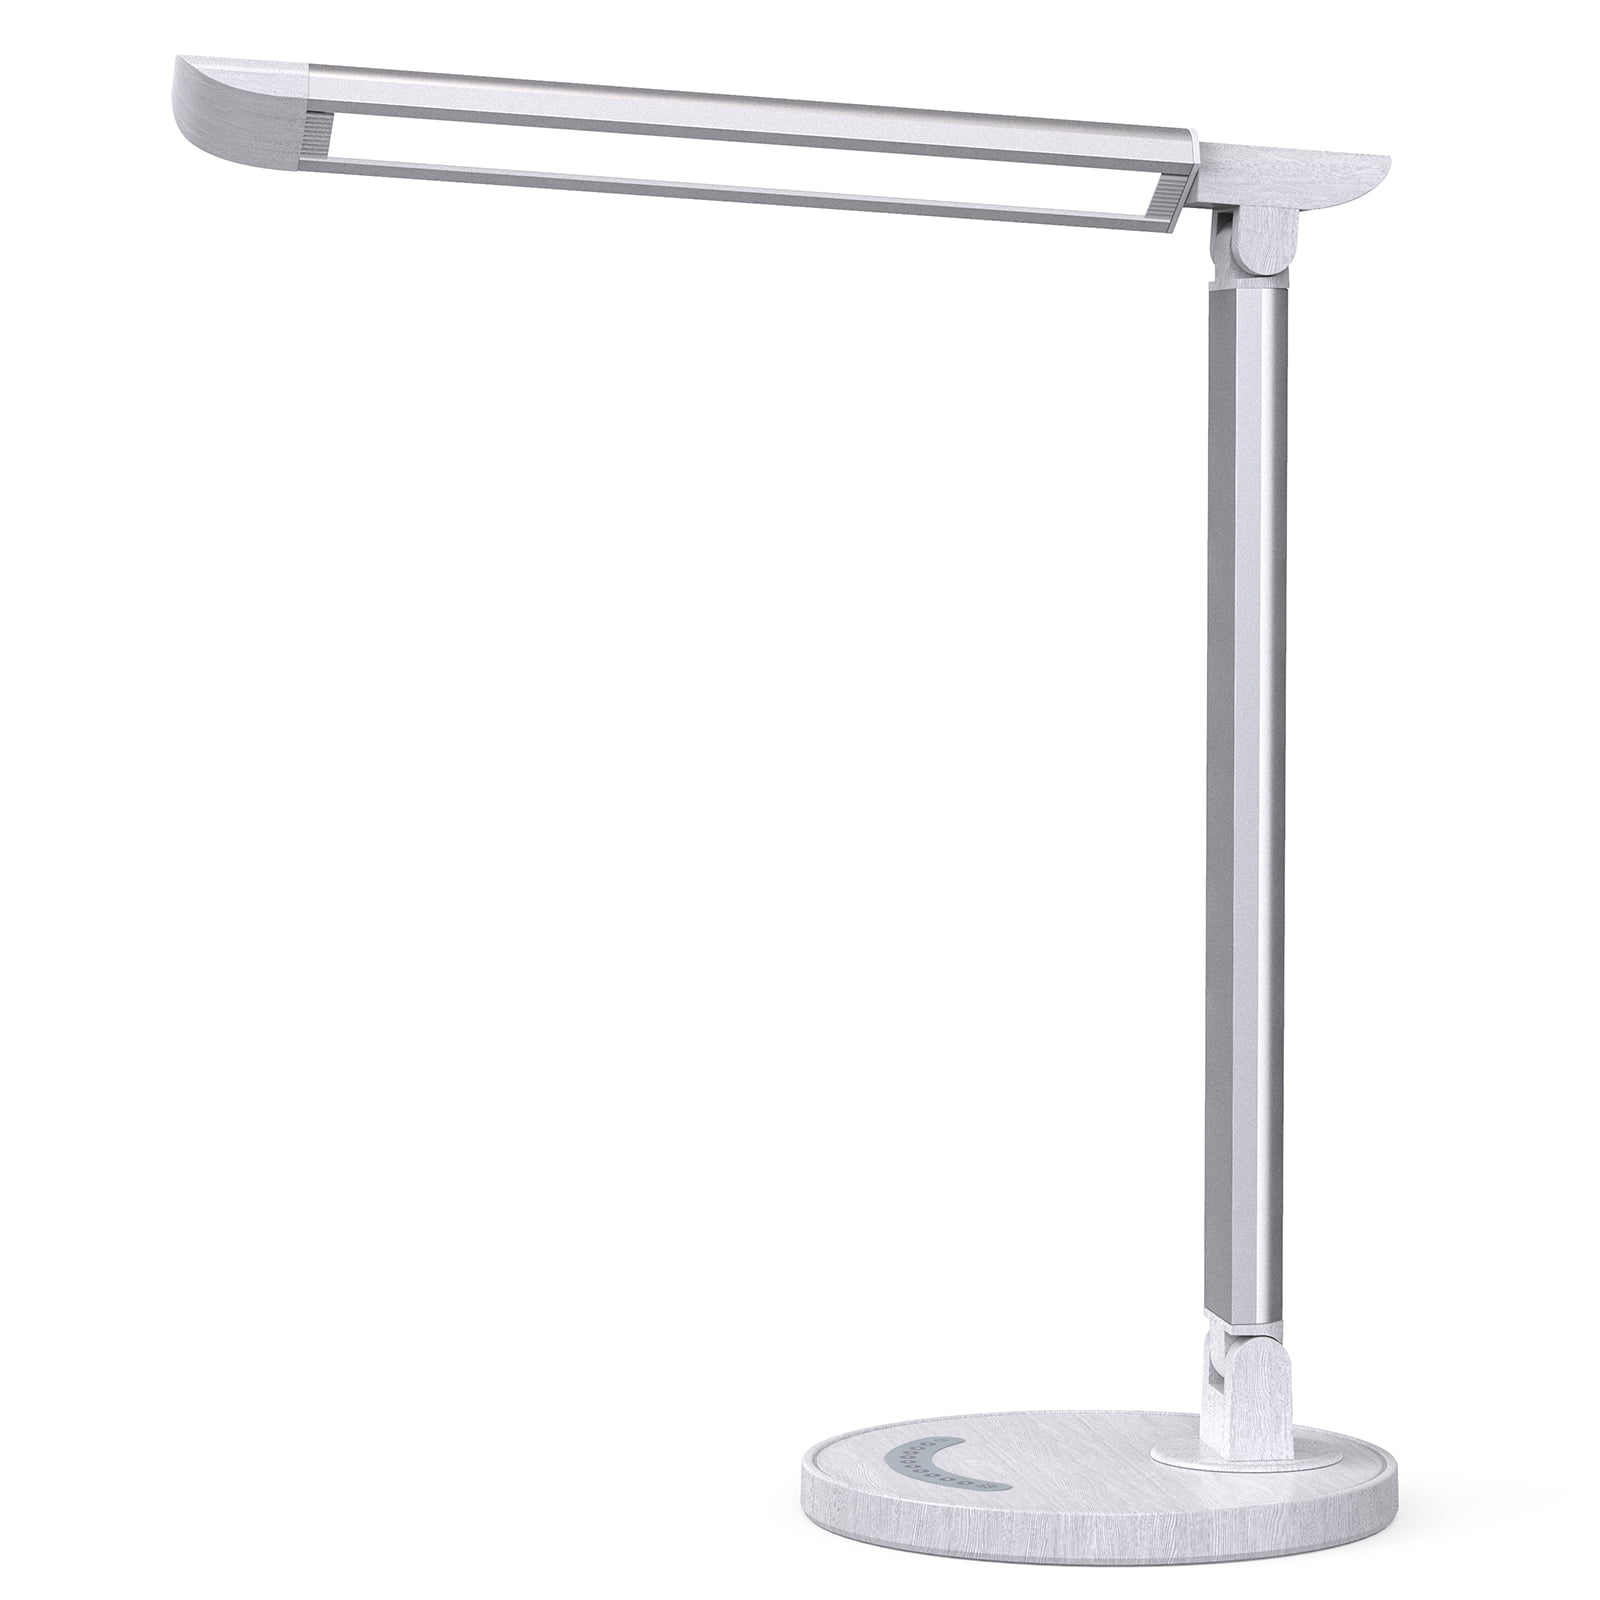 TaoTronics LED Desk Eye-Caring Table Dimmable Office Lamp with USB Charging Port Touch Control White Wood Grain 12W 5 Lighting Modes with 7 Brightness Levels 